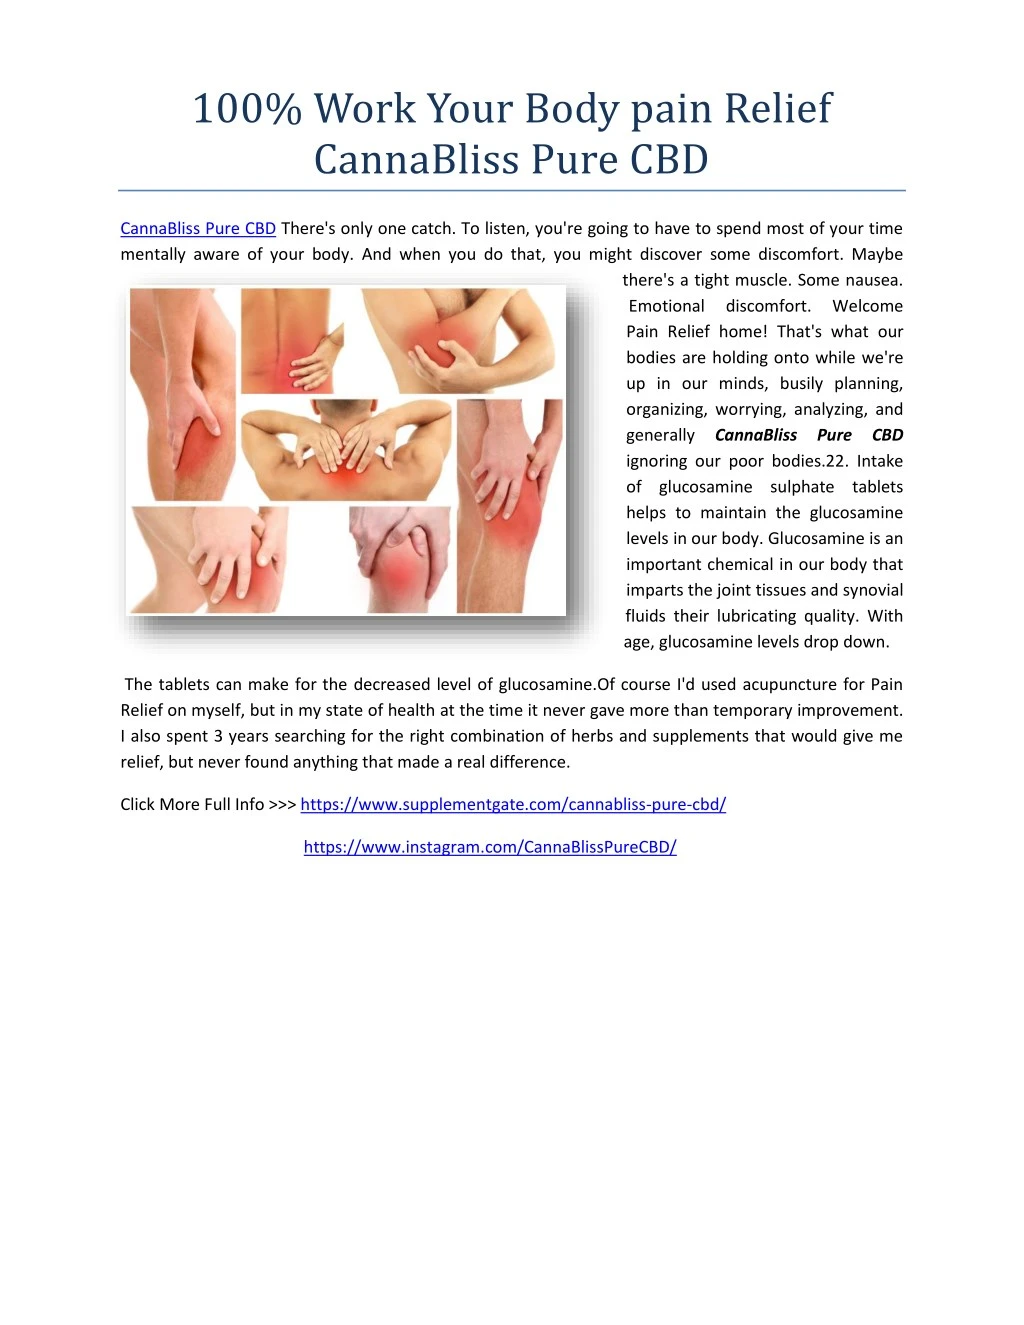 100 work your body pain relief cannabliss pure cbd